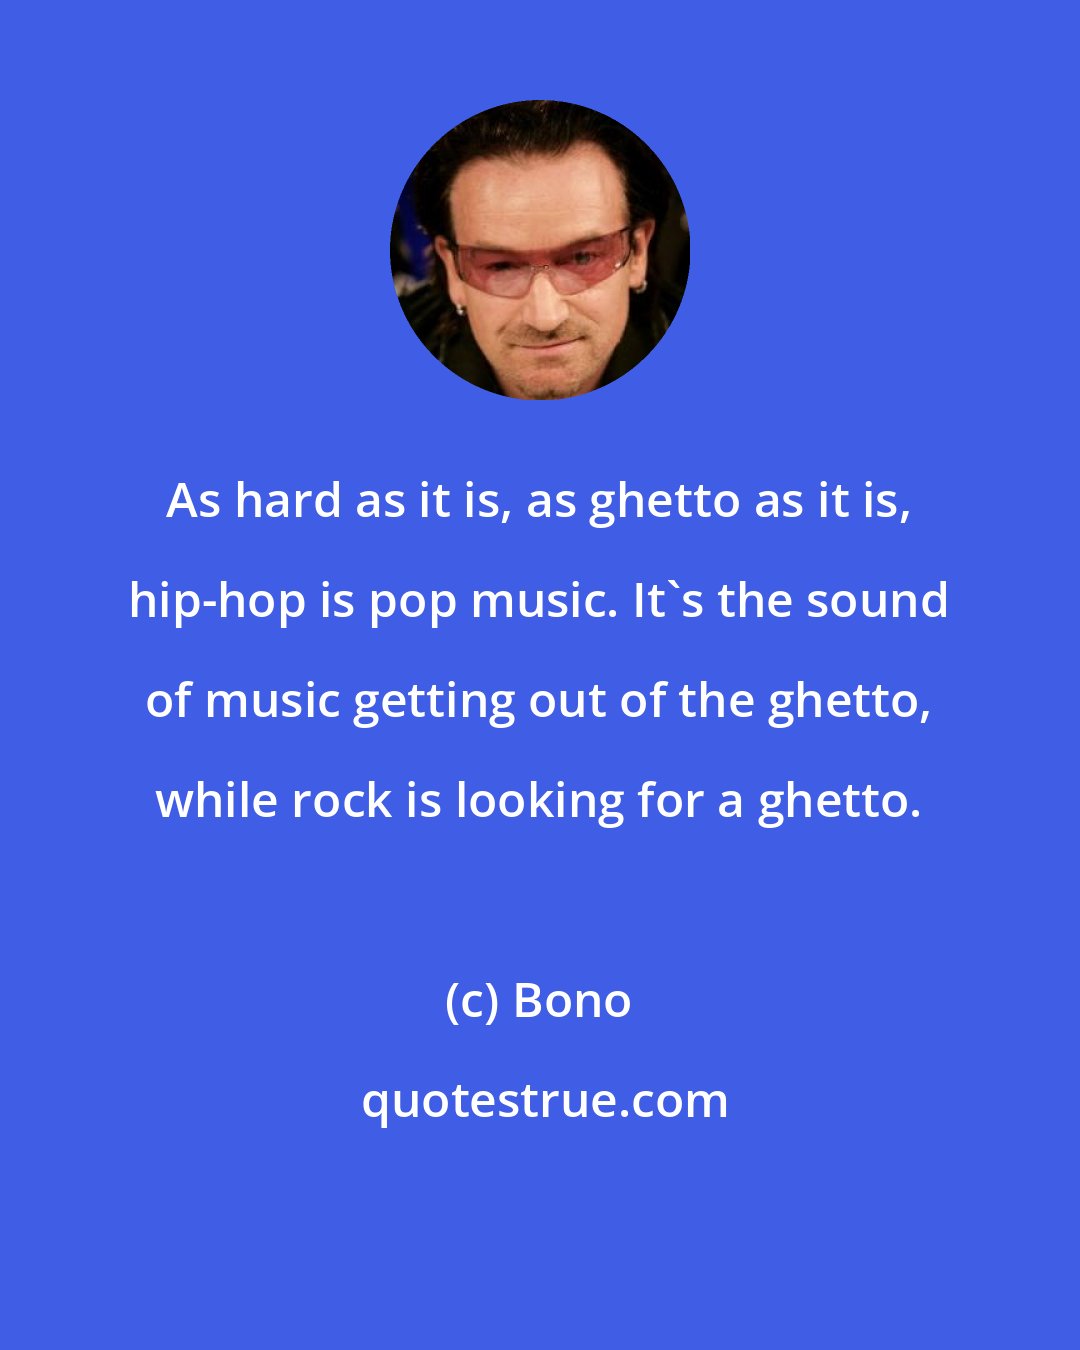 Bono: As hard as it is, as ghetto as it is, hip-hop is pop music. It's the sound of music getting out of the ghetto, while rock is looking for a ghetto.